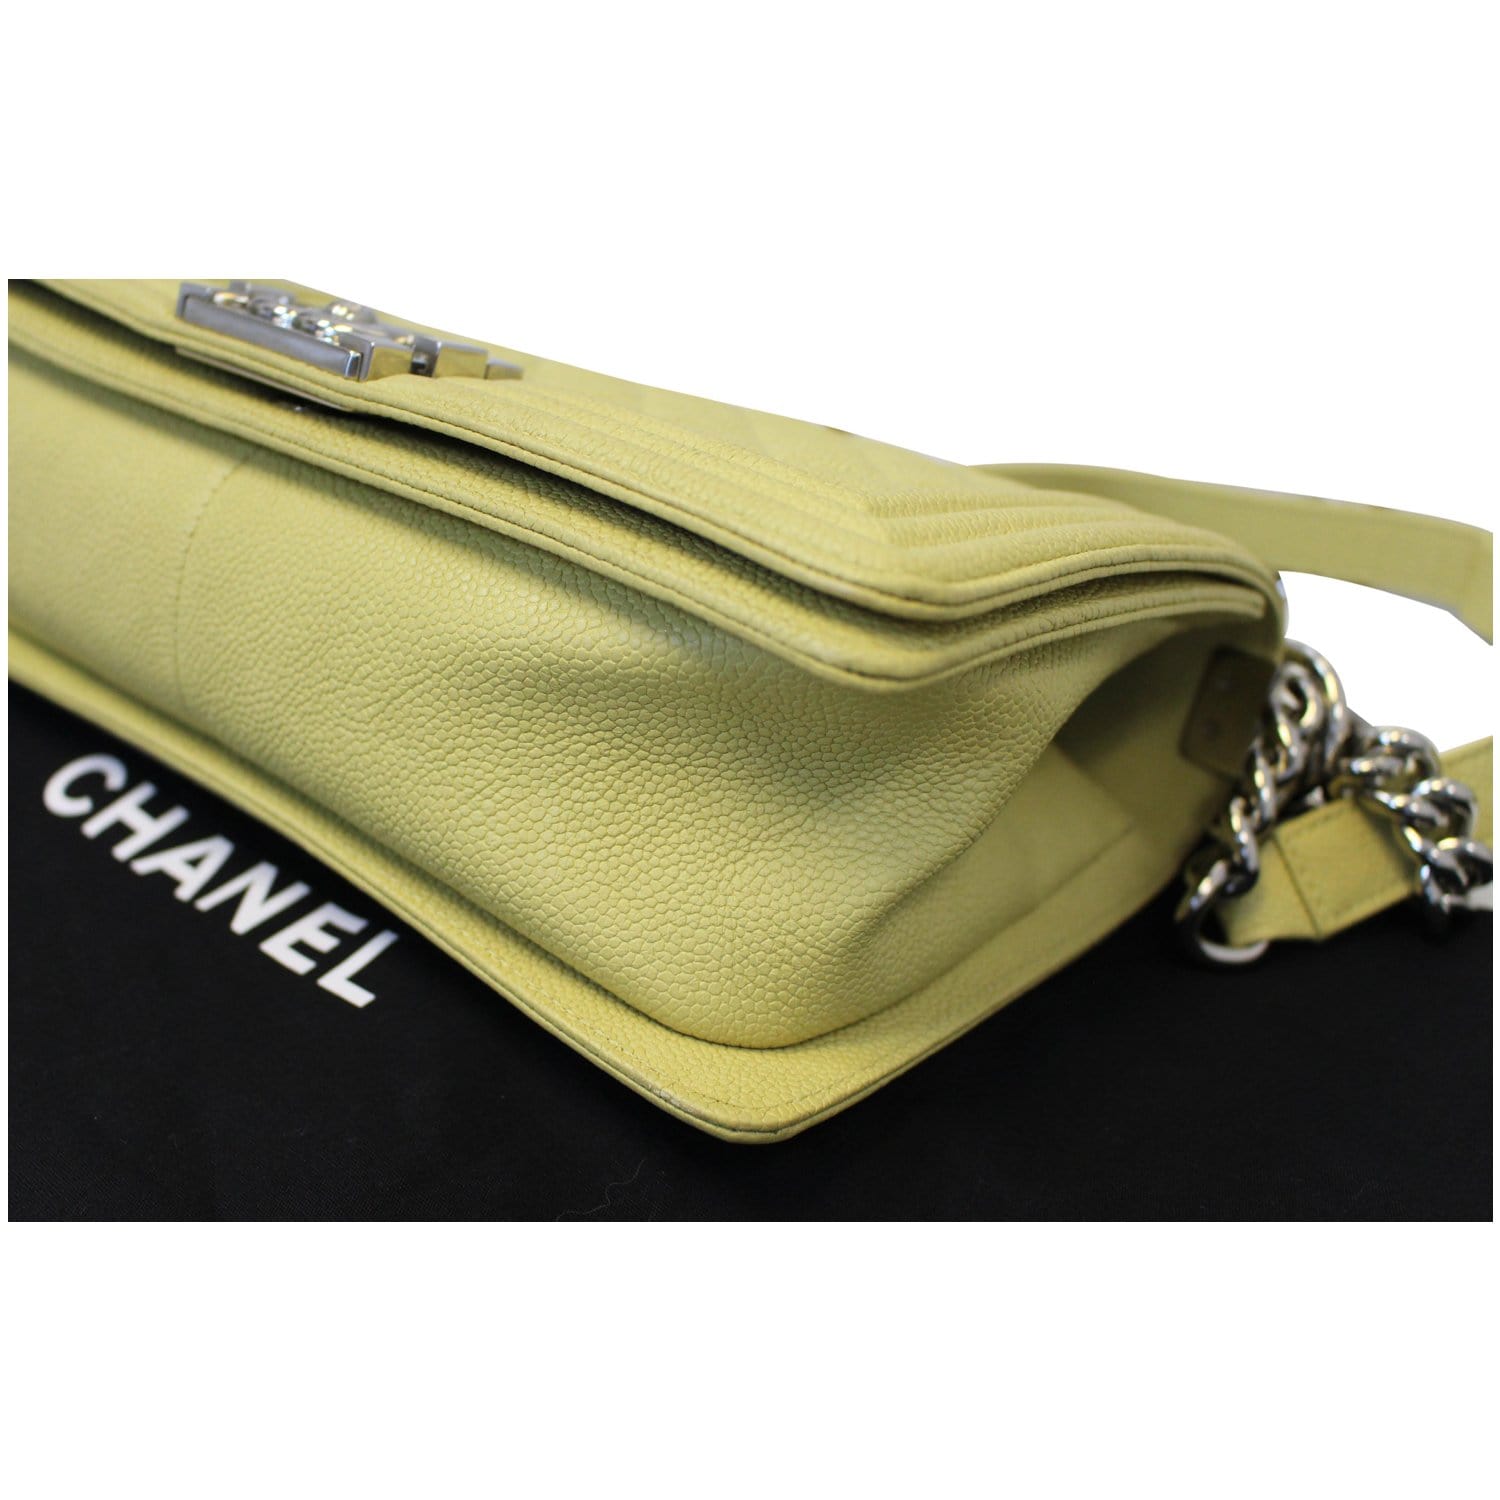 Chanel Large Yellow Caviar O-Case Zip Pouch Case Pochette 861568 –  Bagriculture